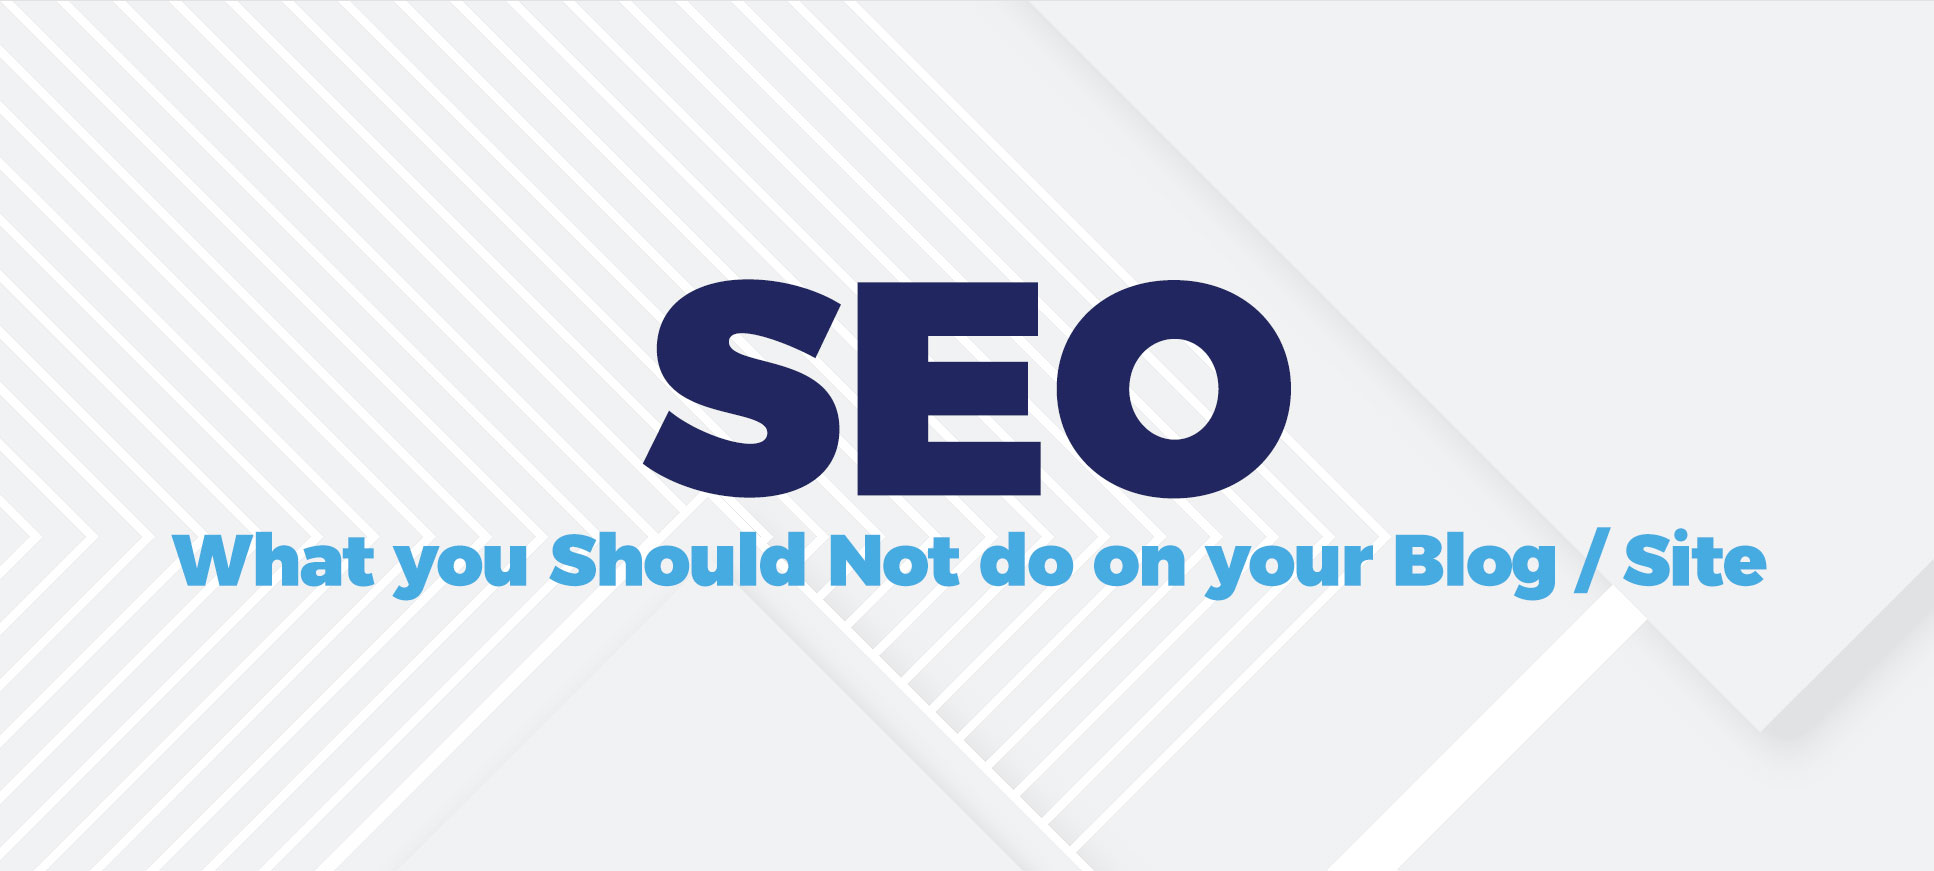 seo what you should not do on your website blog